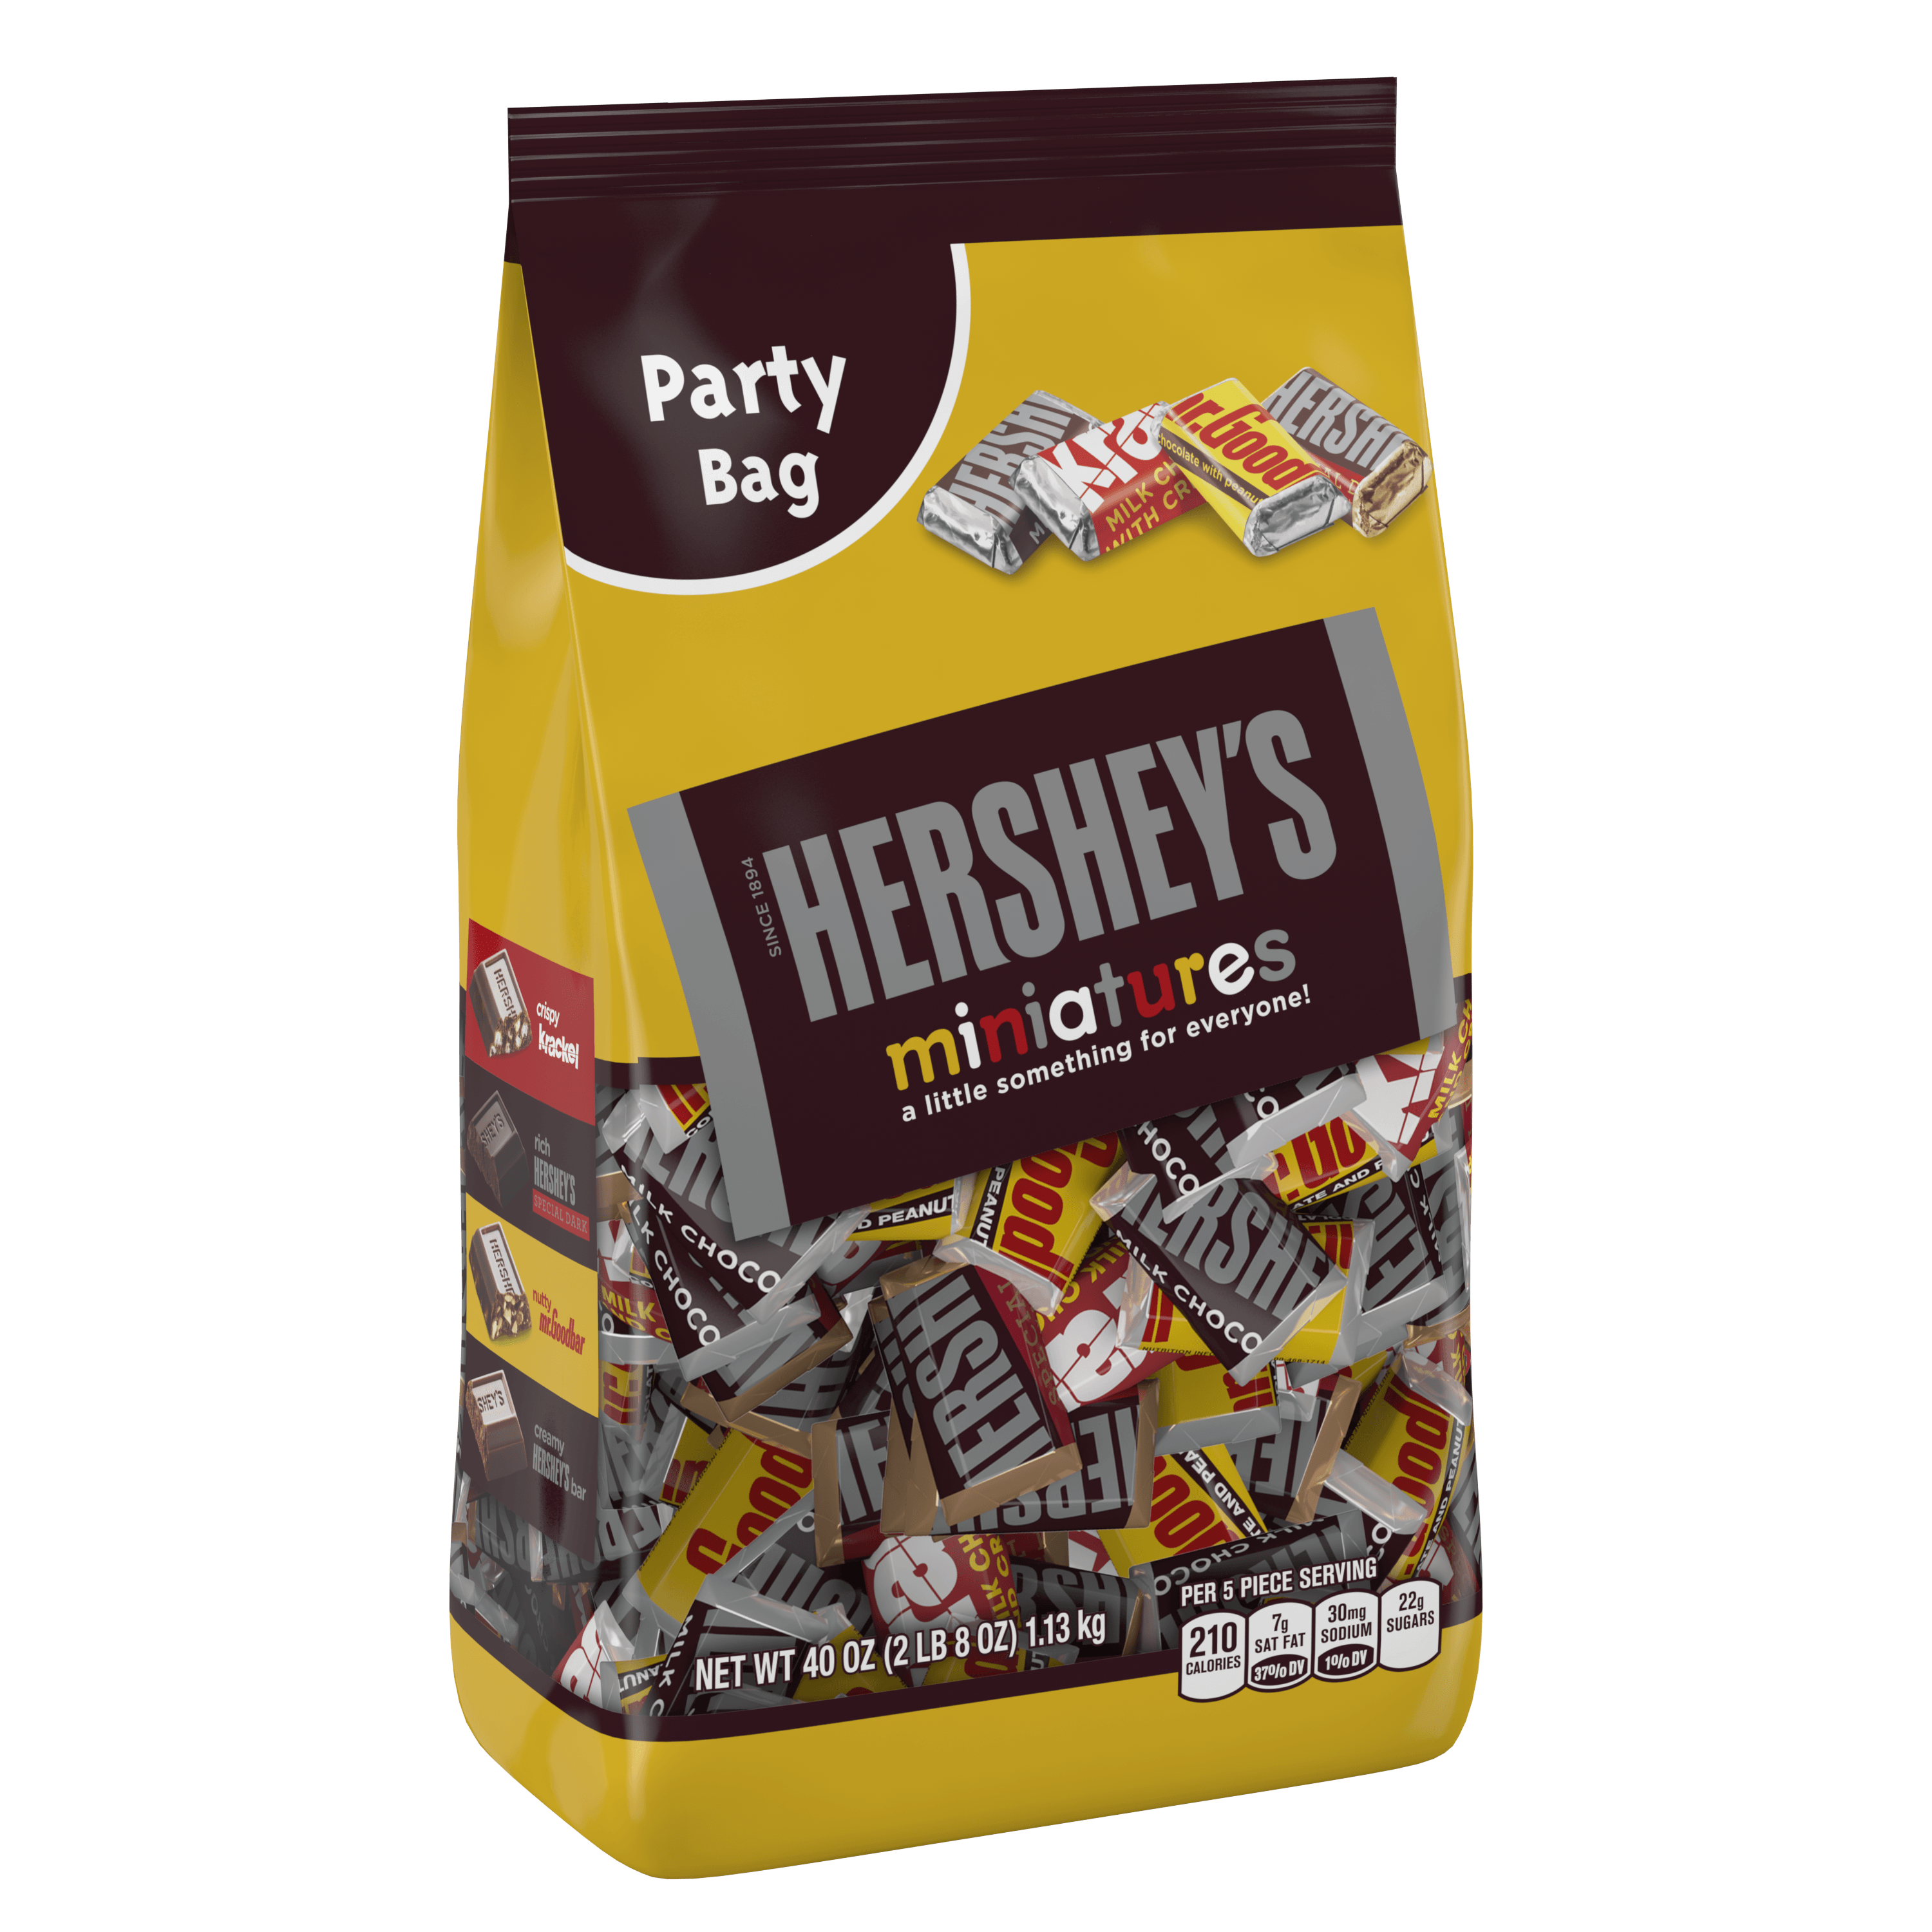 Hershey's, Miniatures Assortment Chocolate Candy, 40 Oz - image 1 of 8